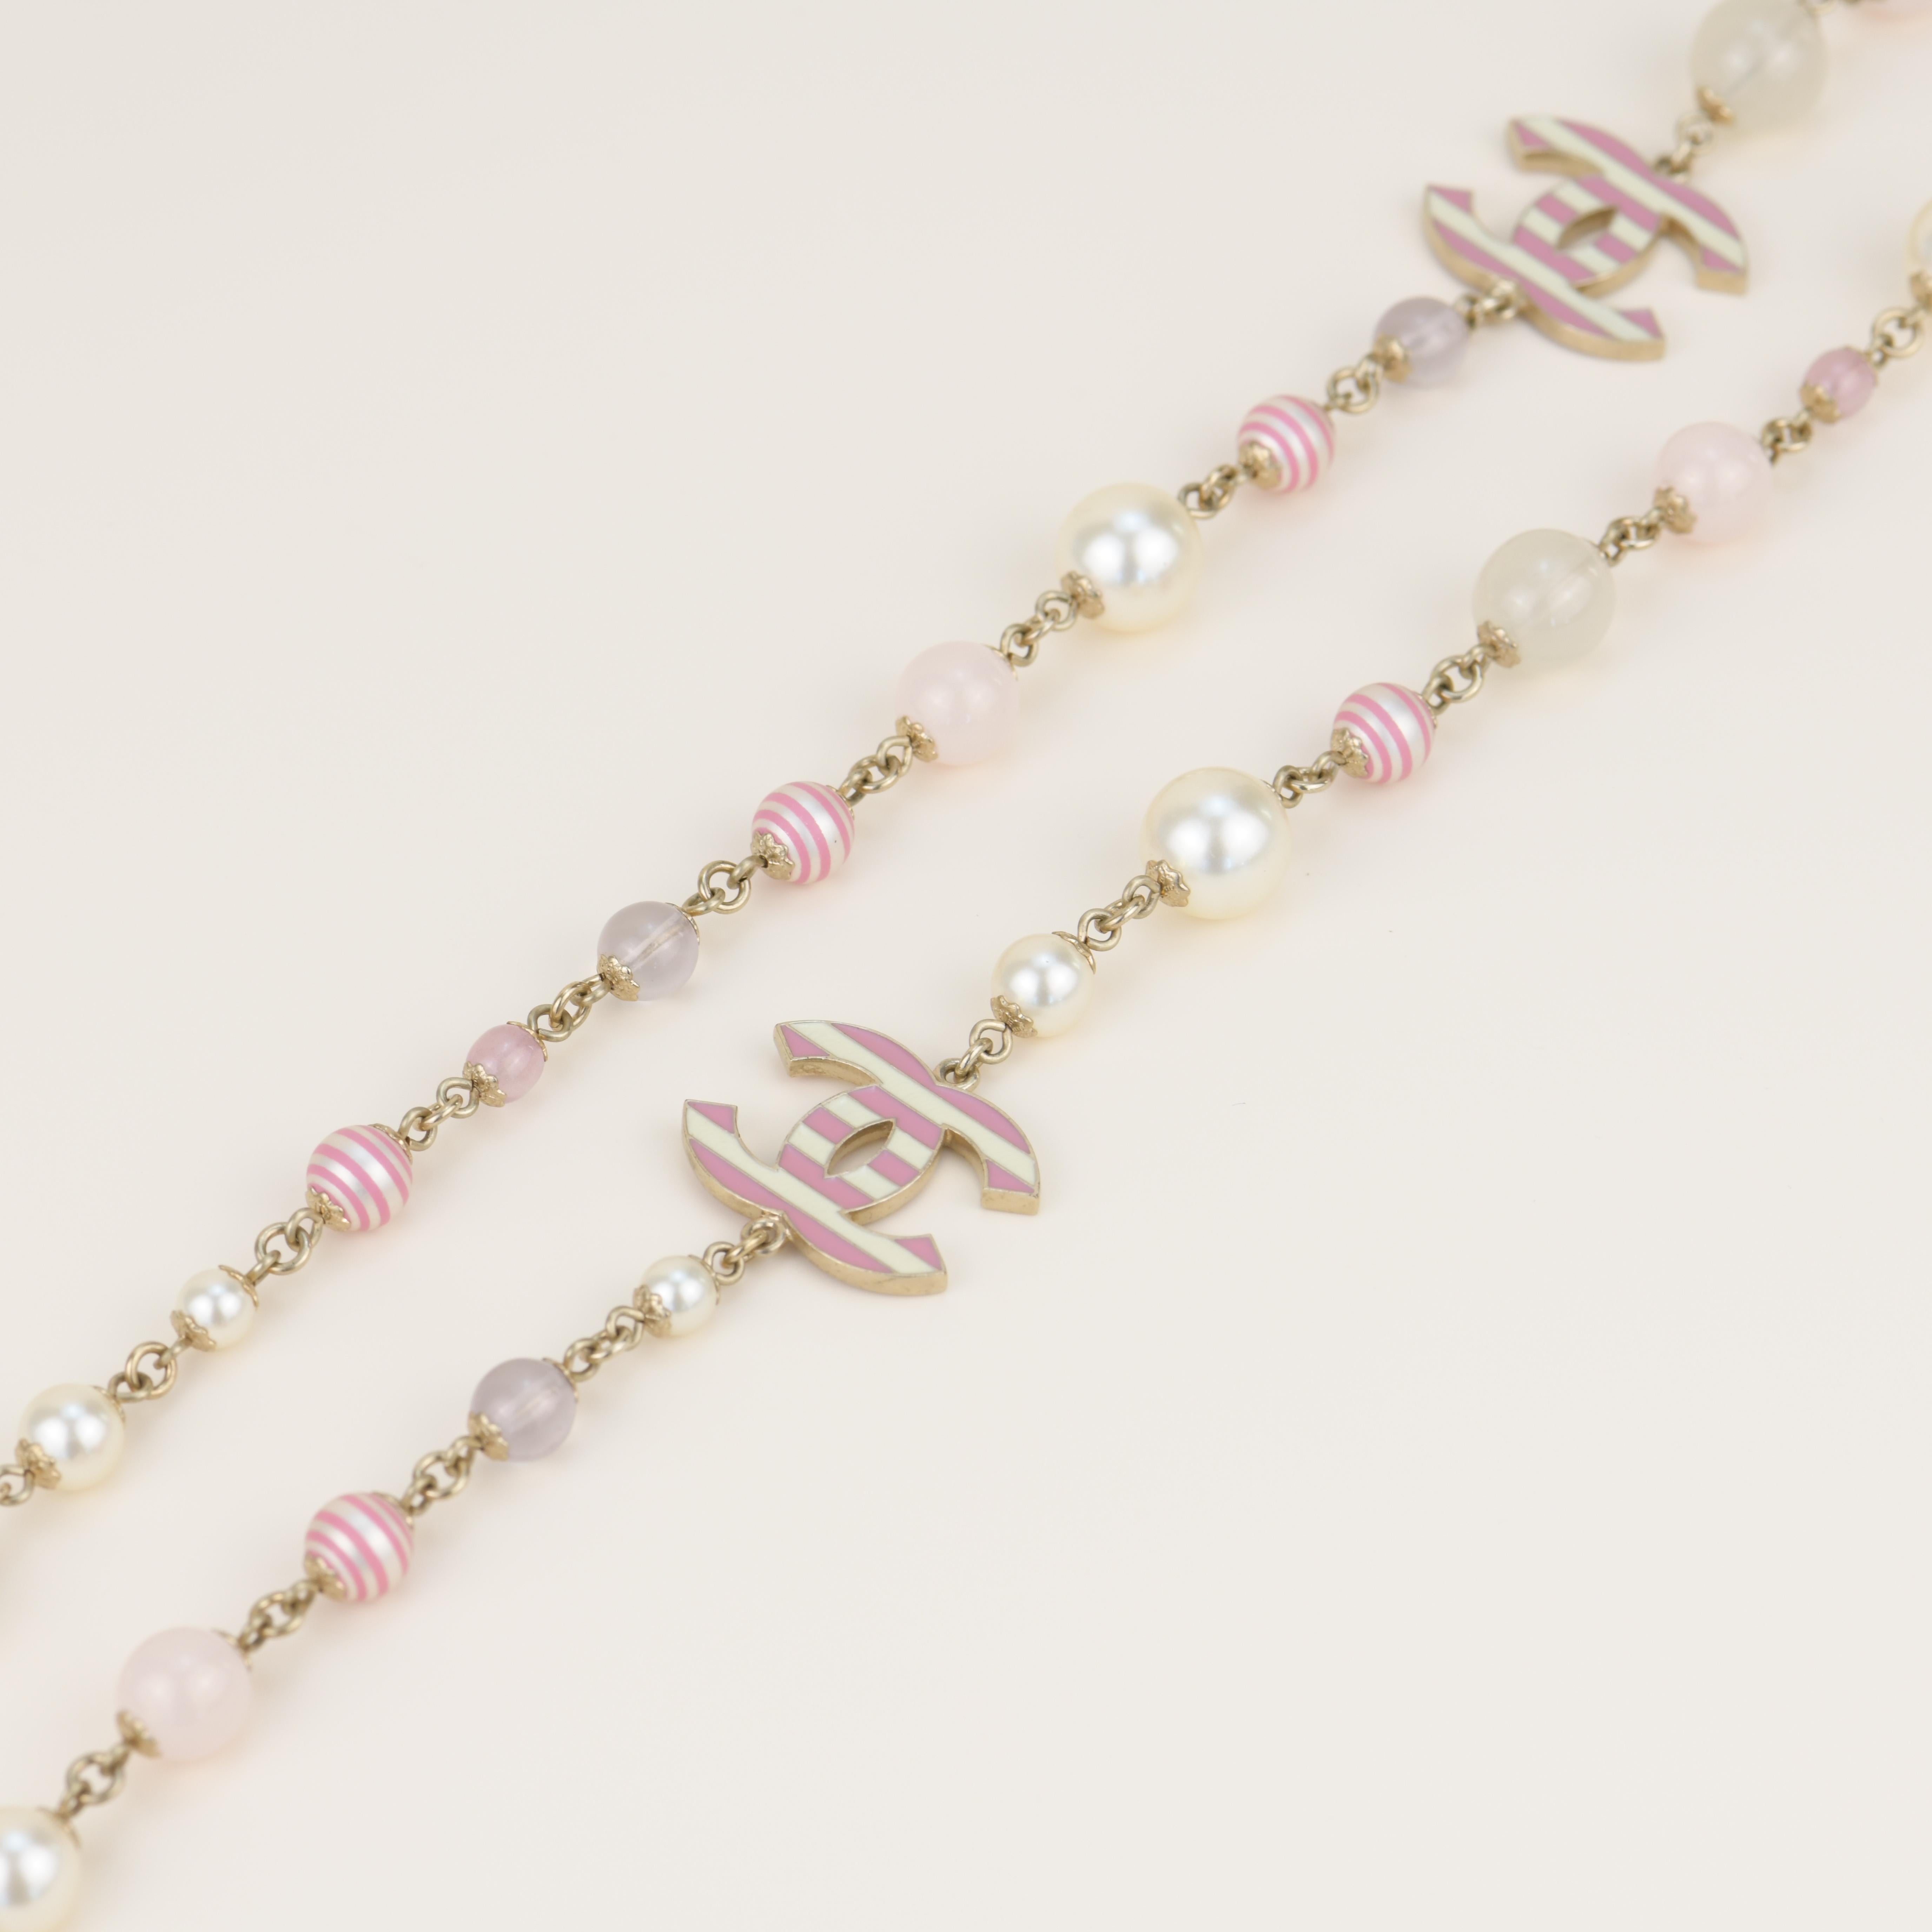 Bead CHANEL Enamel Striped Pearl CC Pink Long Necklace 